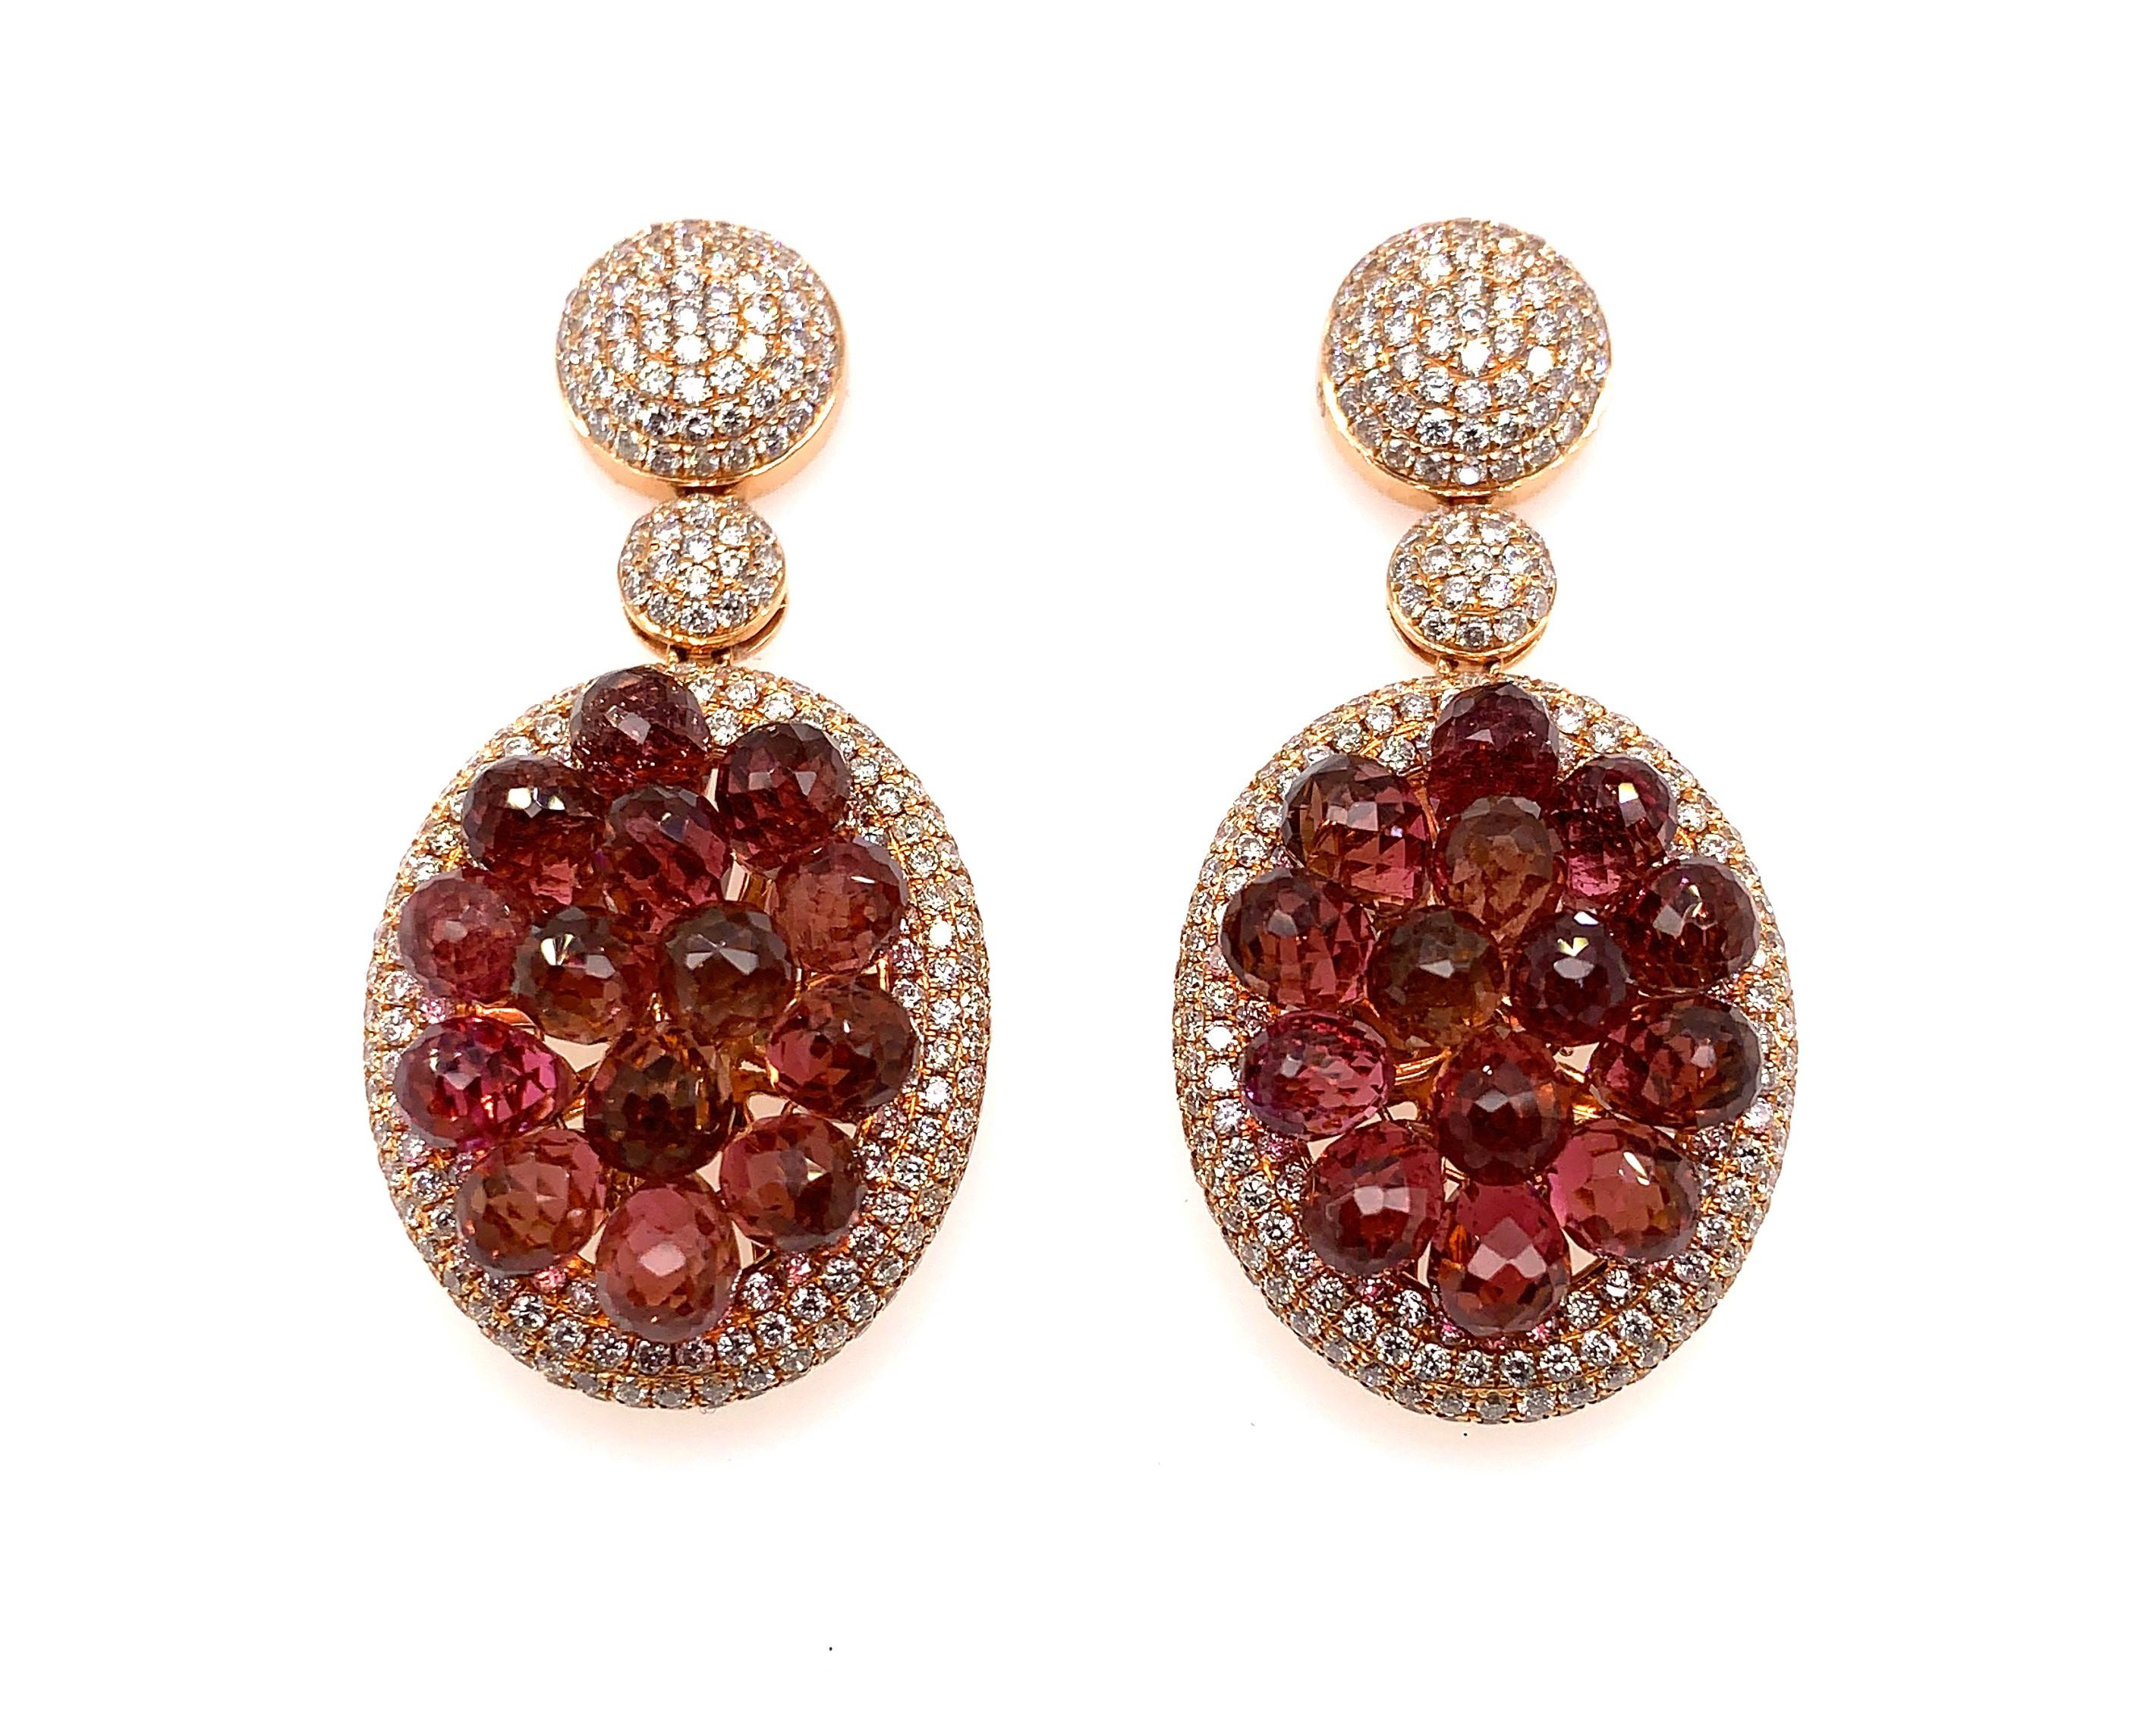 Fancy a grape? Well how about a bunch of them?

Sunita Nahata uses a cluster of the brightest pink tourmalines to recreate a grape-like look. Perfect to be styled for any summer occasion, these earrings sit playfully on any ear. The rose gold and